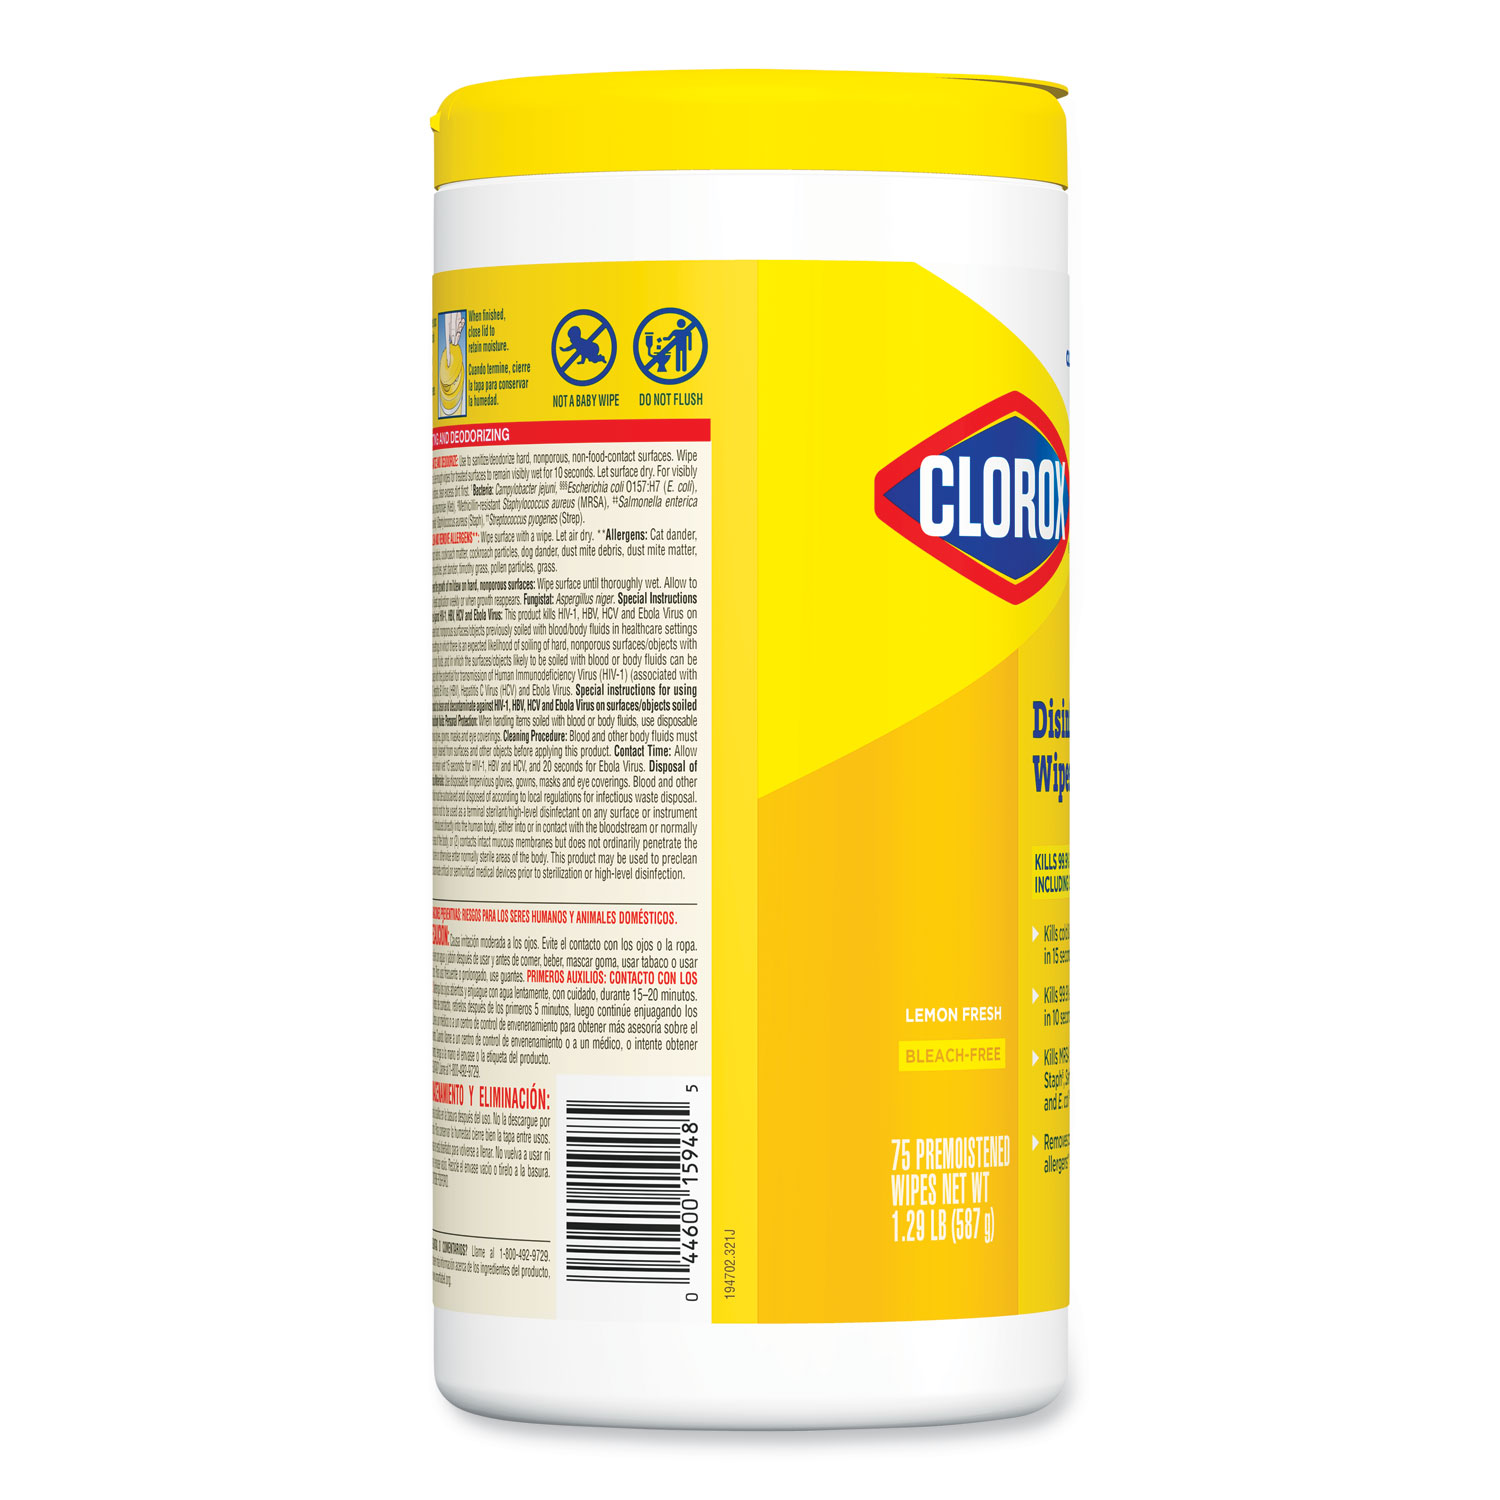 Clorox Disinfecting Wipes, 7x8, Fresh Scent/Citrus Blend, 75/Canister,  3/PK, 4 Packs/CT, CLO30208